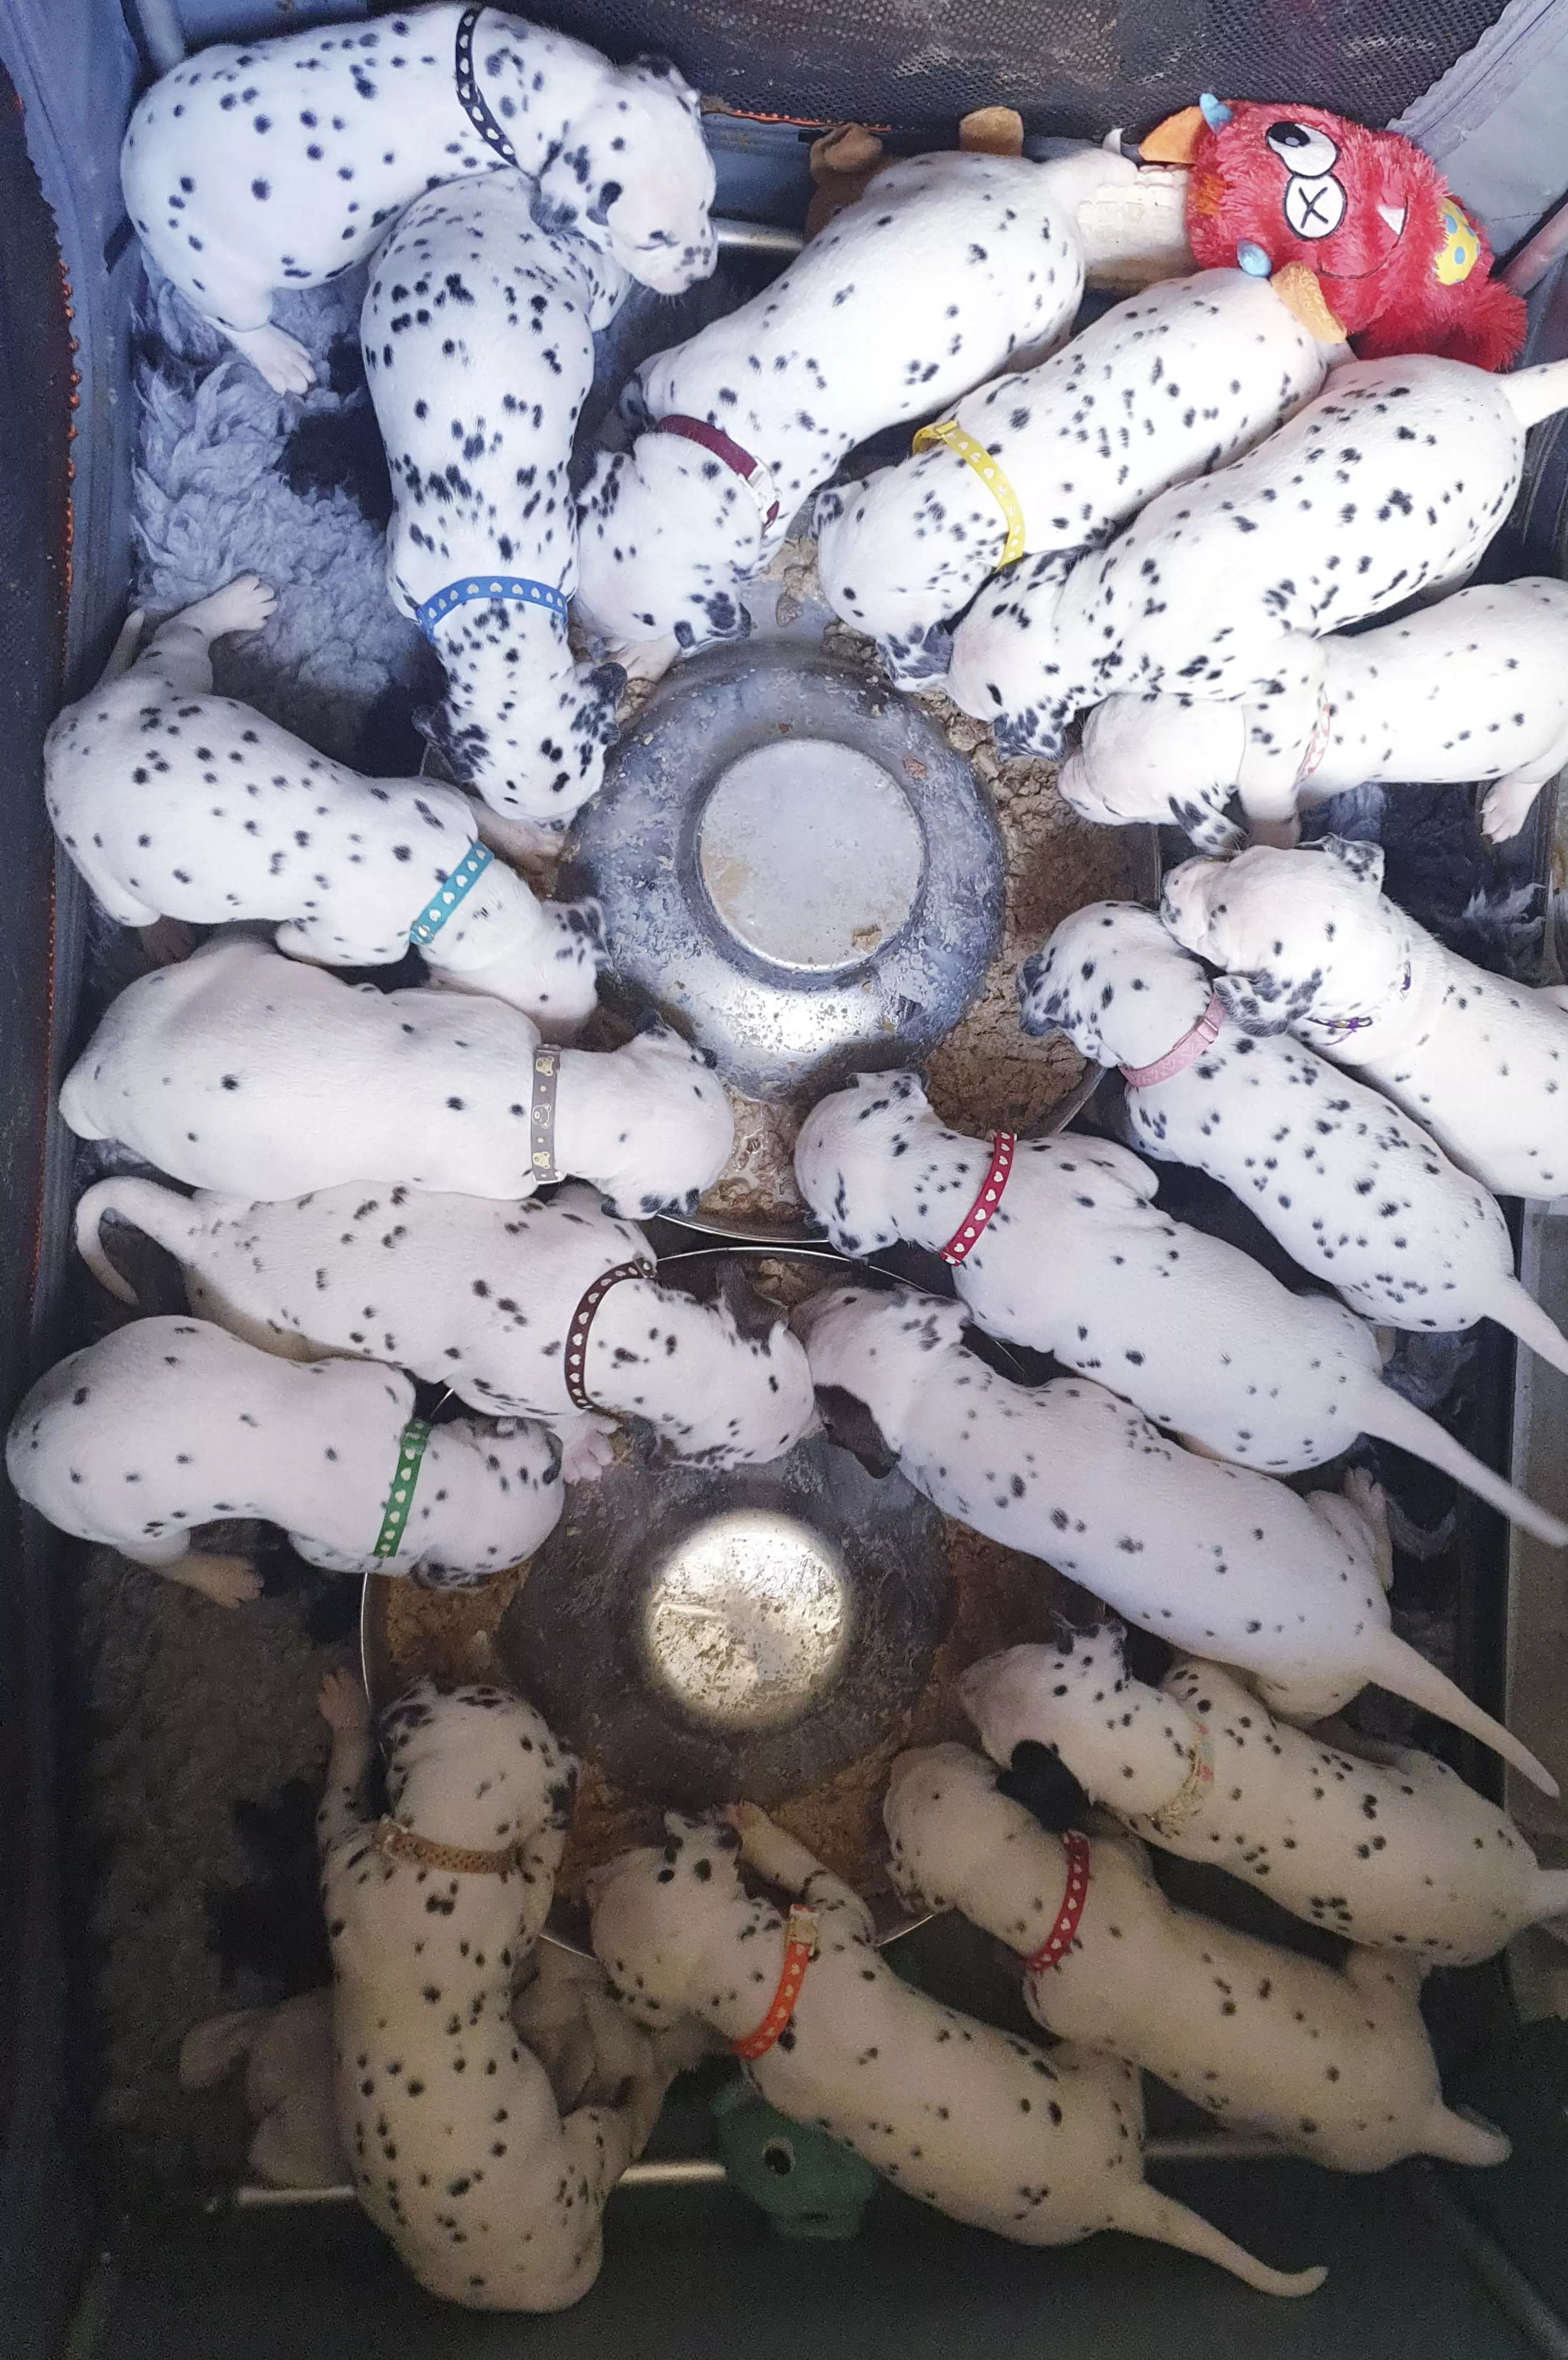 The brood of 18 is one short of the world record for Dalmatian litters (